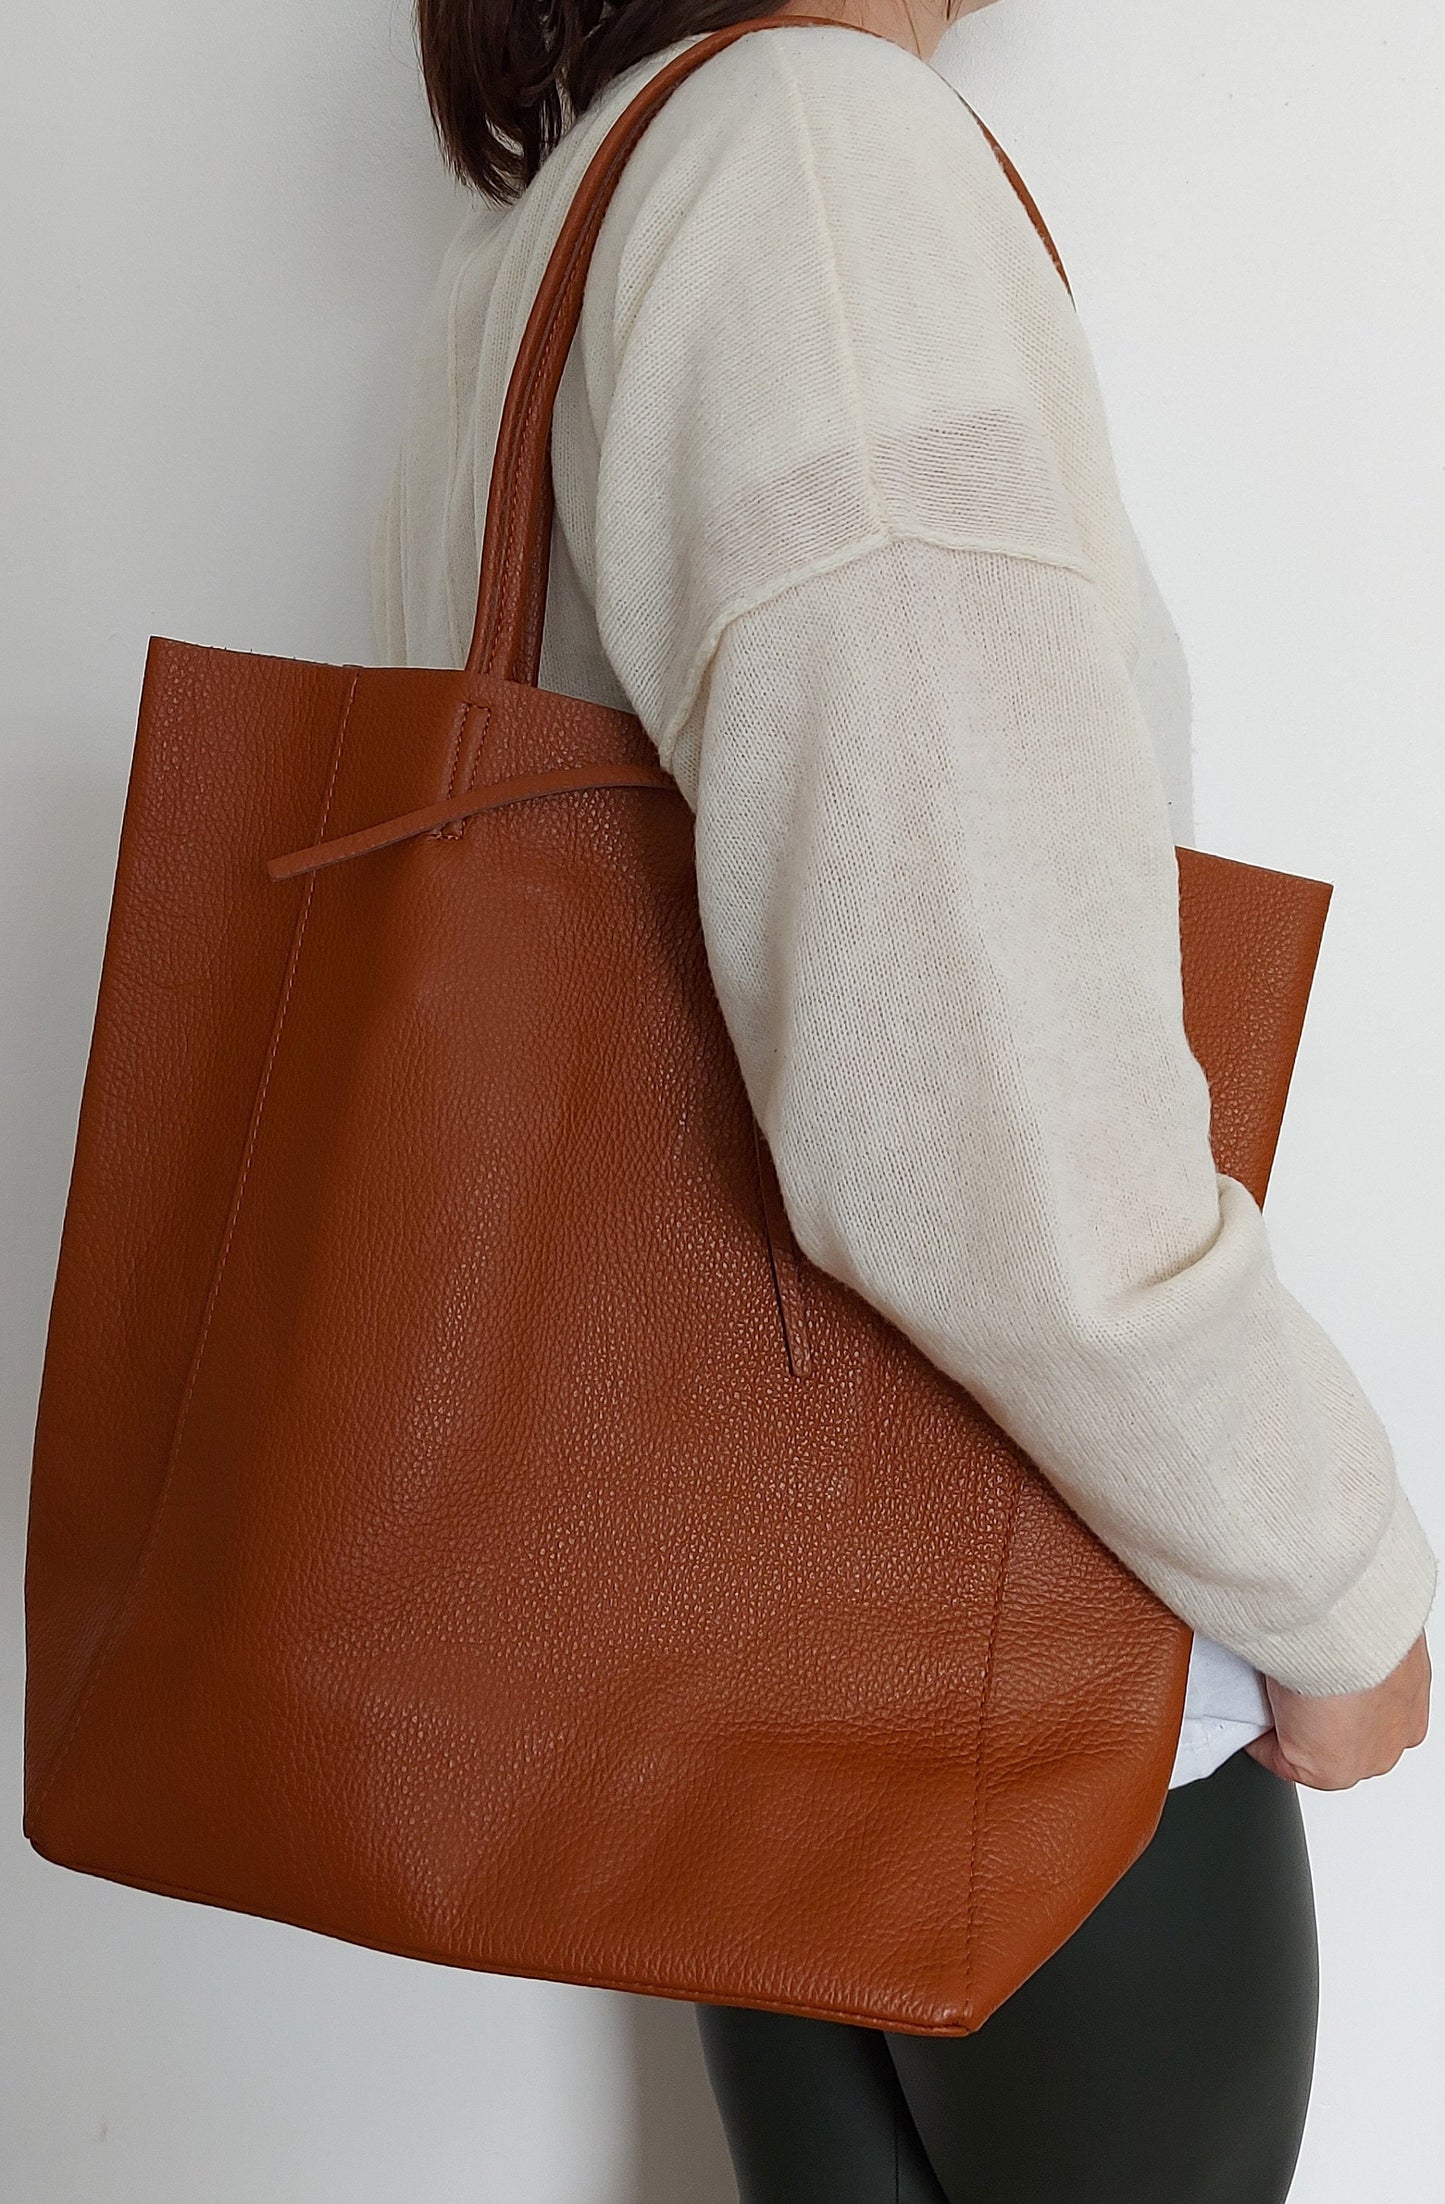 Brown Genuine Leather Shopper Bag Large Leather Tote Bag